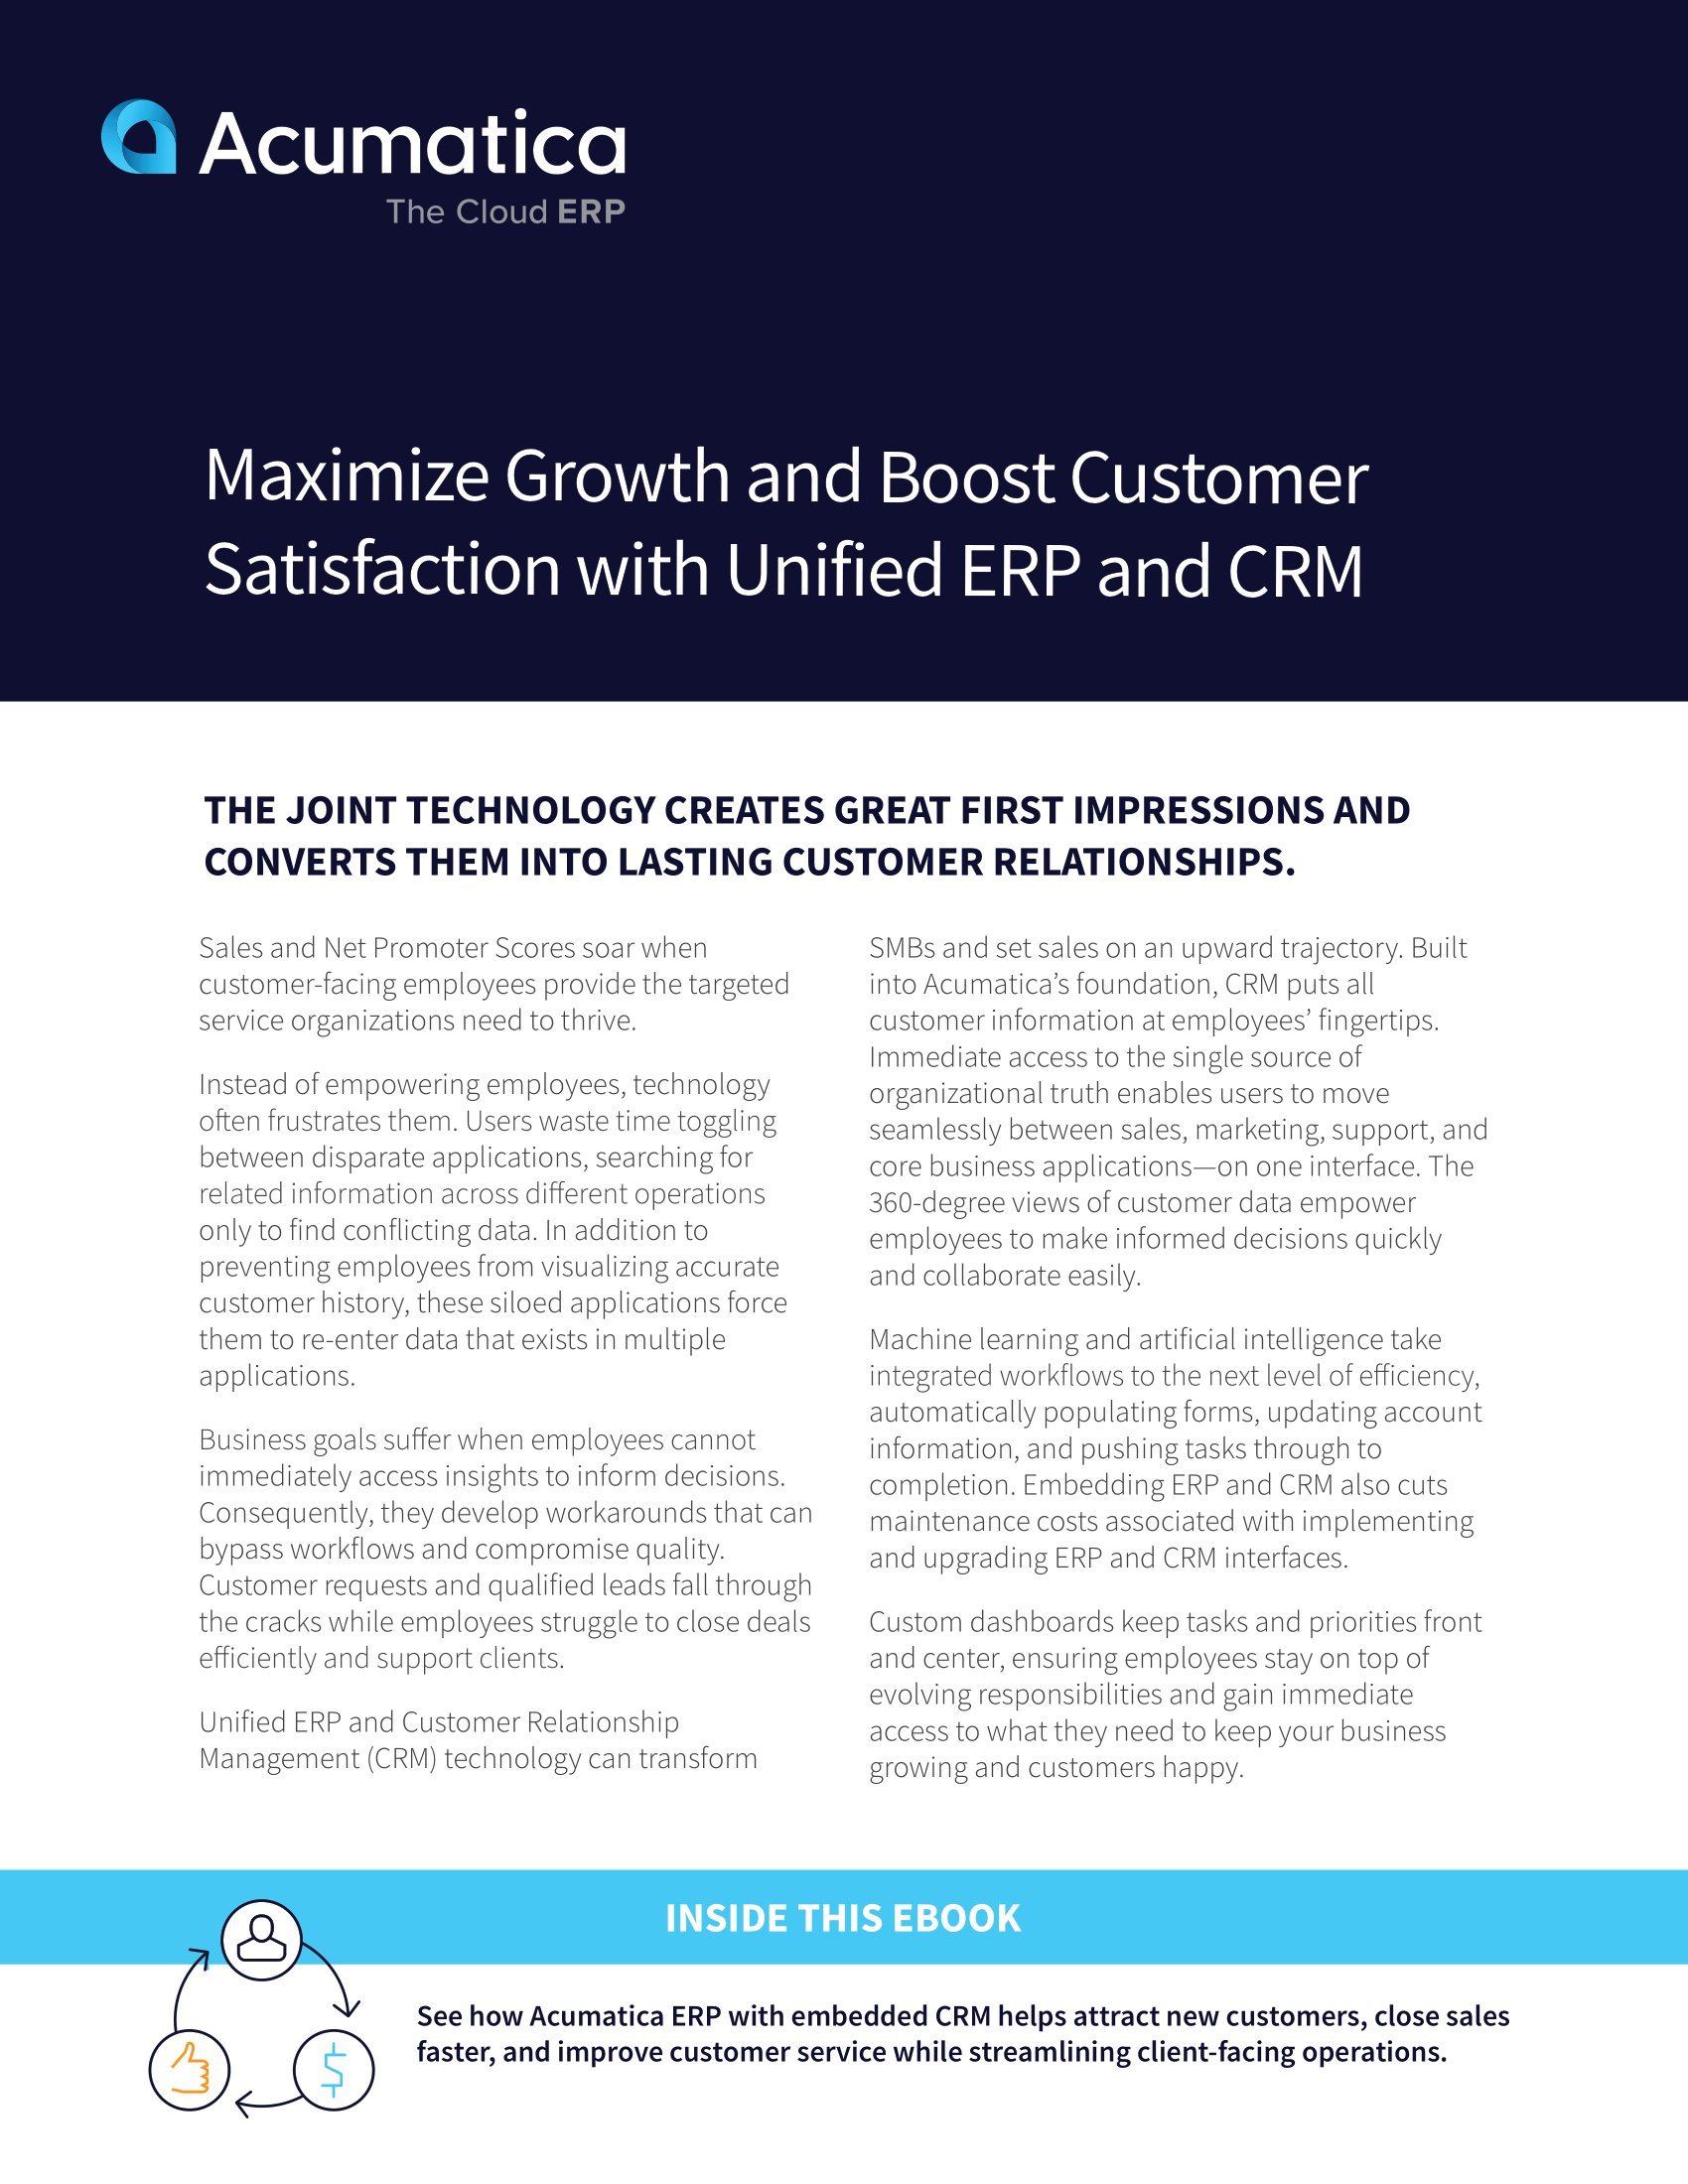 Maximize Your Business Growth by Using ERP with CRM